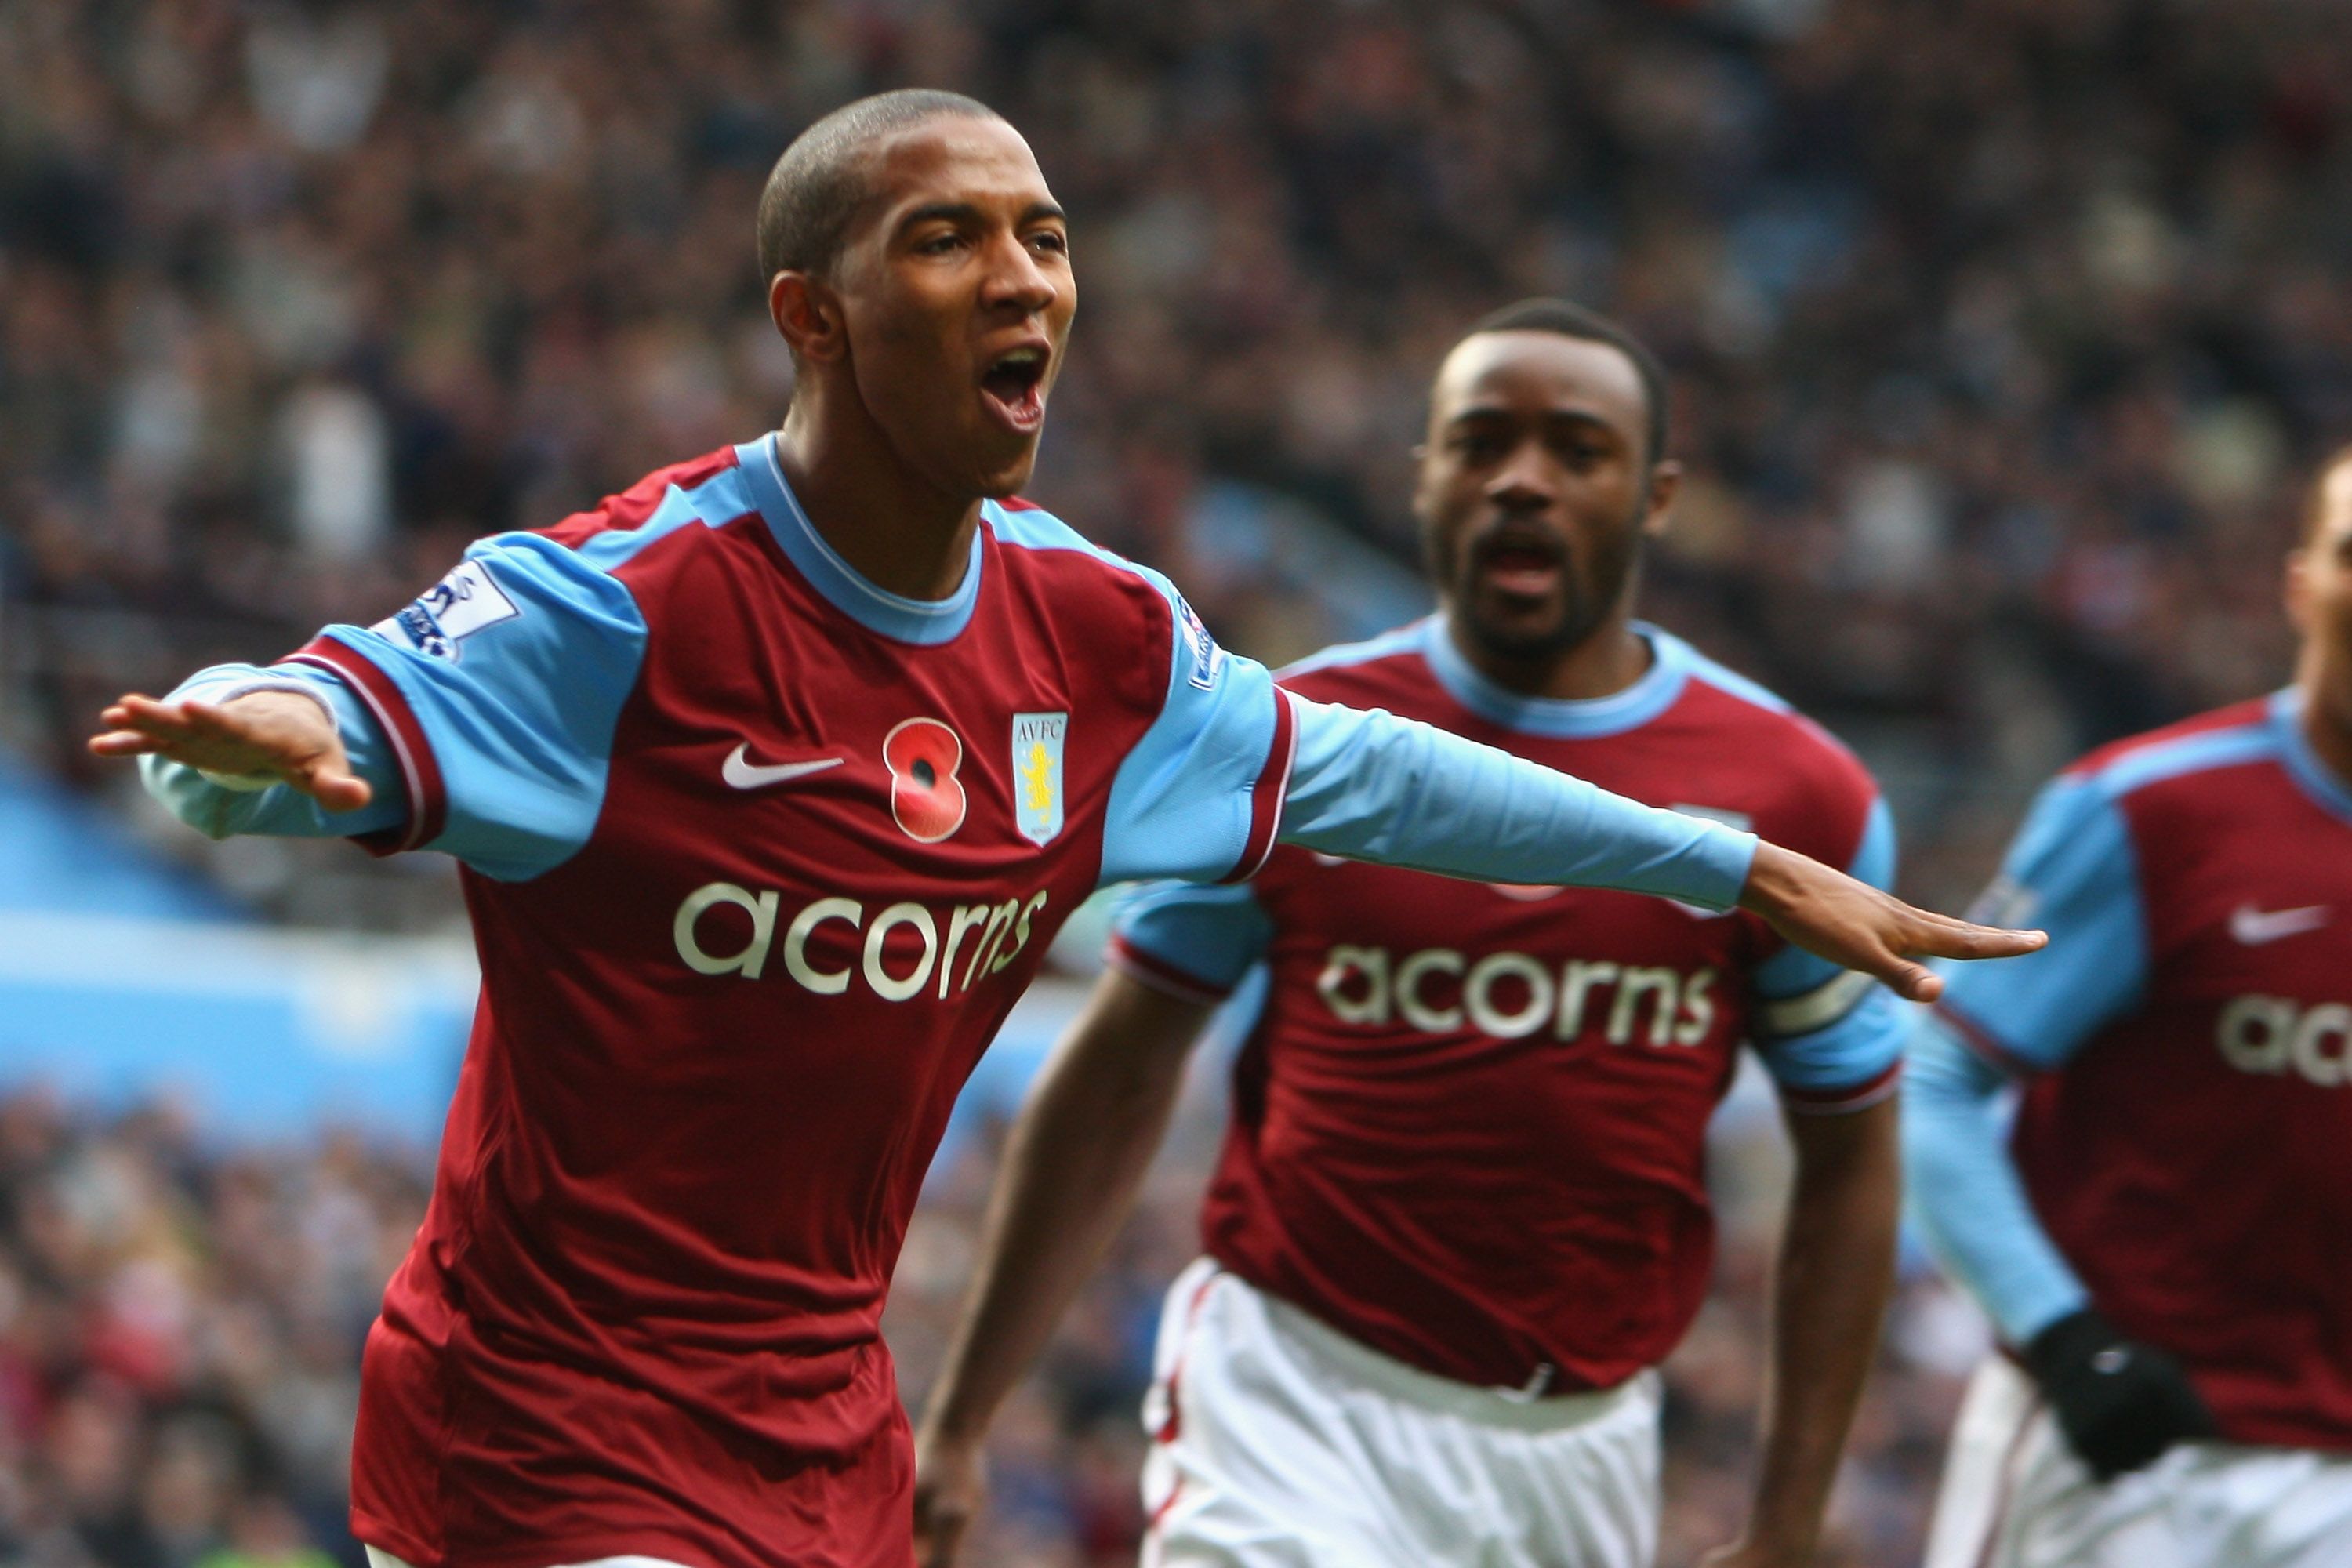 Ashley Young was excellent for Aston Villa in 2009/10